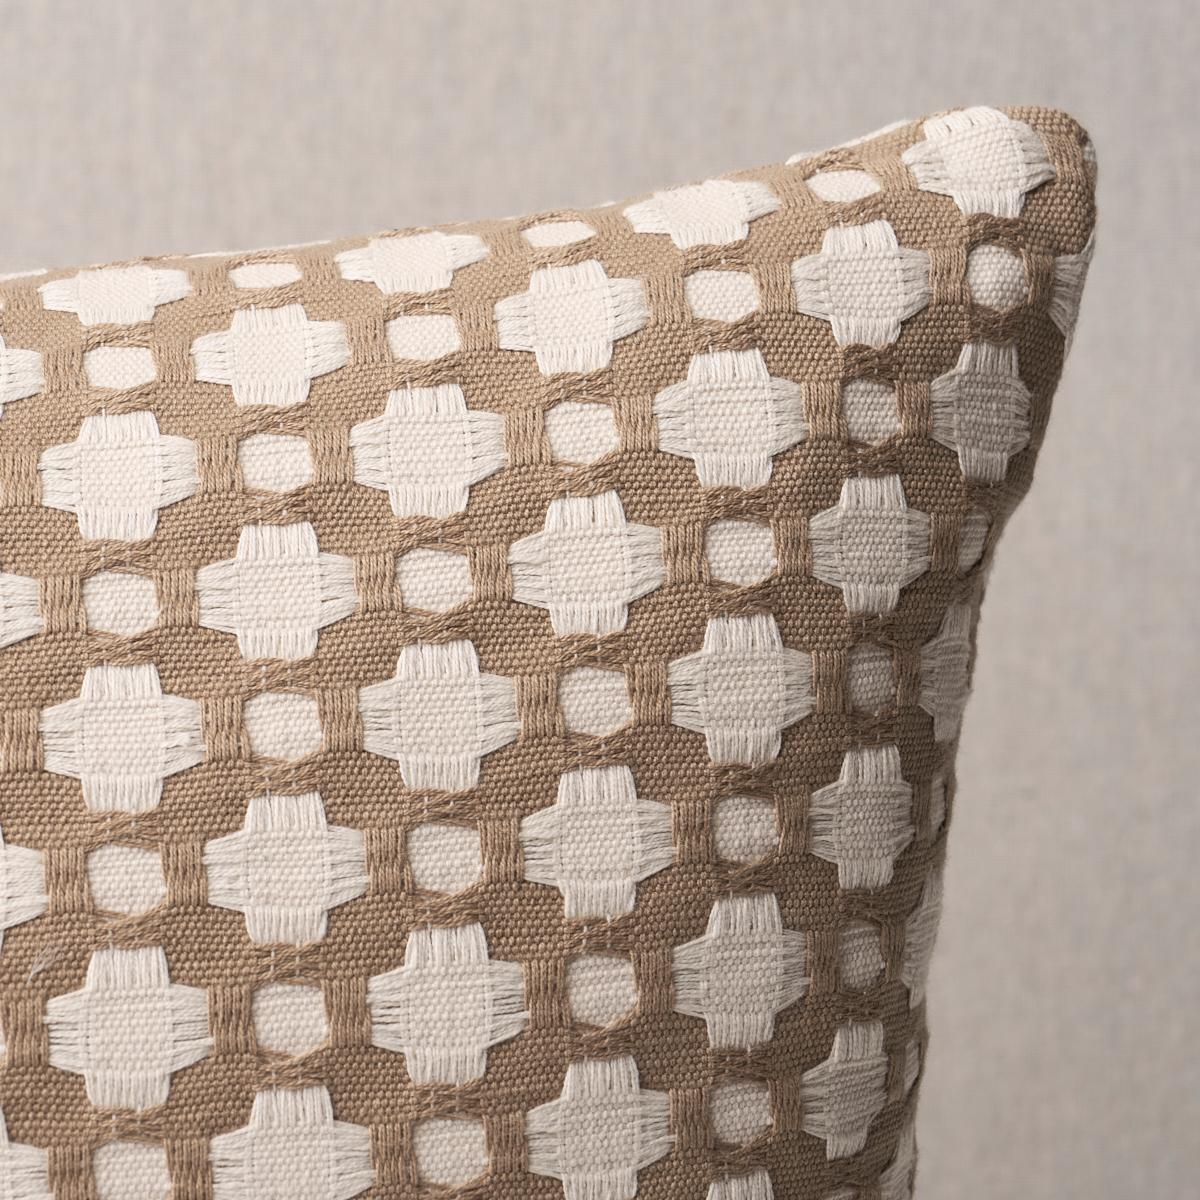 This pillow features Betwixt by Celerie Kemble with a knife edge finish. An endlessly versatile small-scale woven pattern with a handsome geometric look and an appealing, textural hand. Pillow includes a feather/down fill insert and hidden zipper